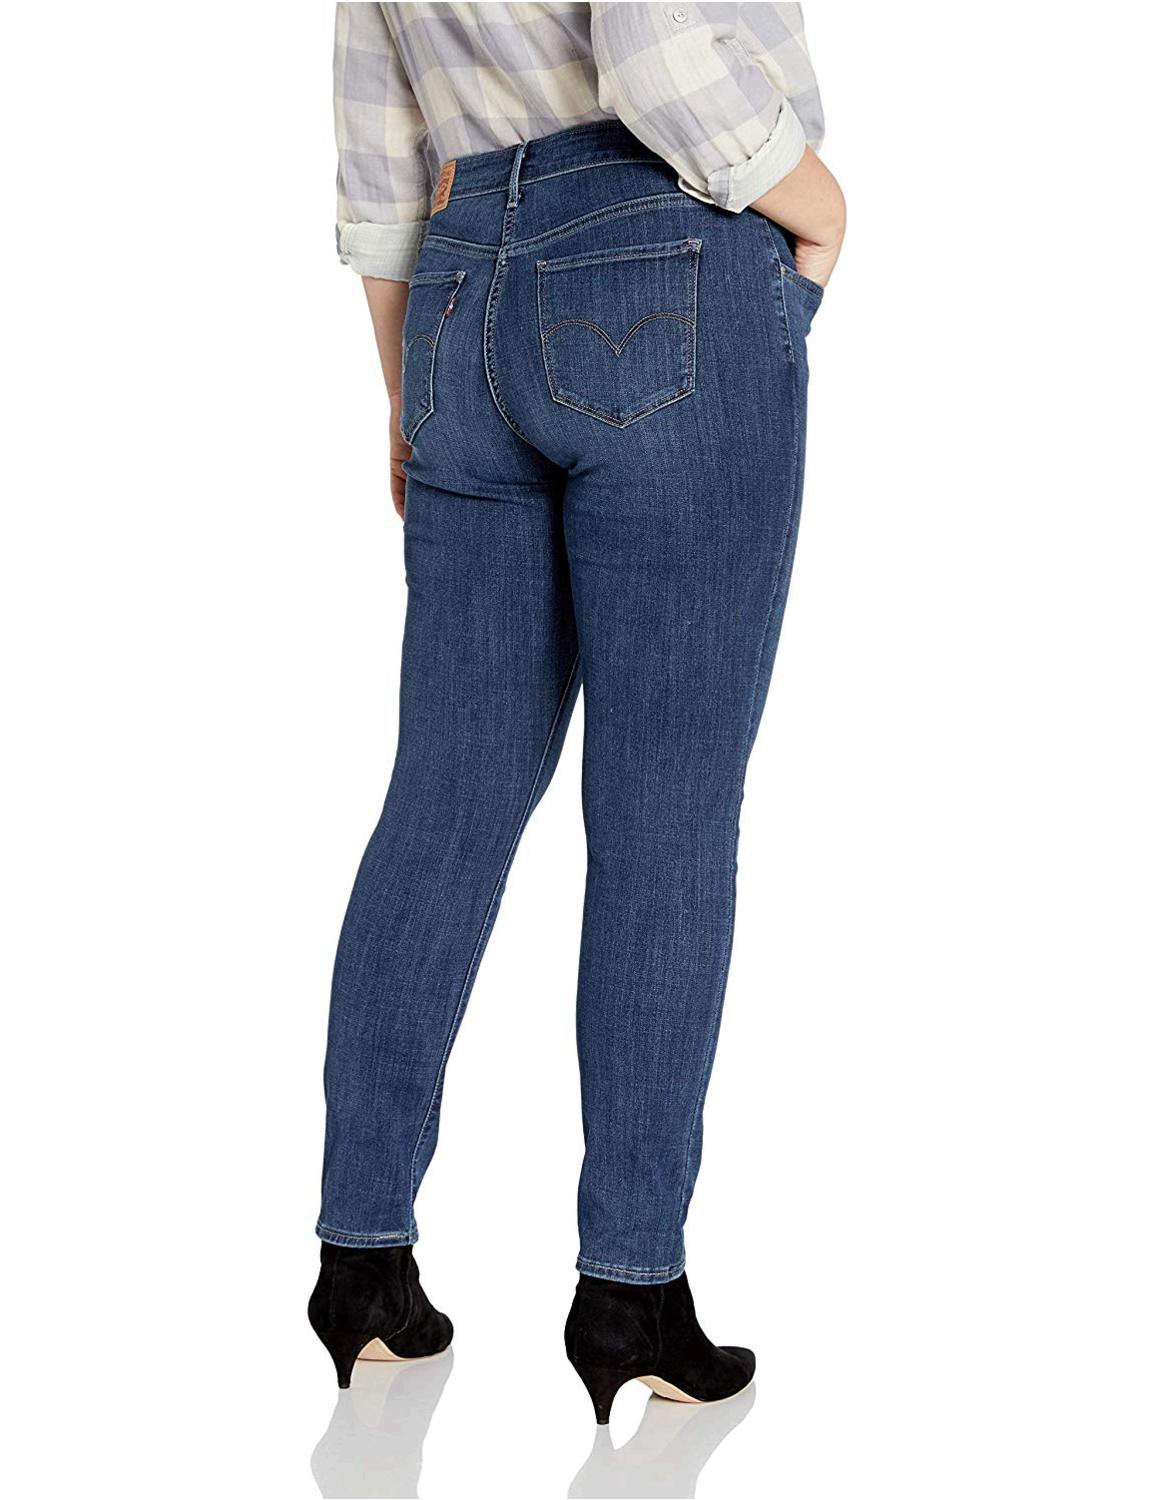 Levi's Women's Plus Size 711 Skinny Jean, Outta Time, 36, Outta Time ...